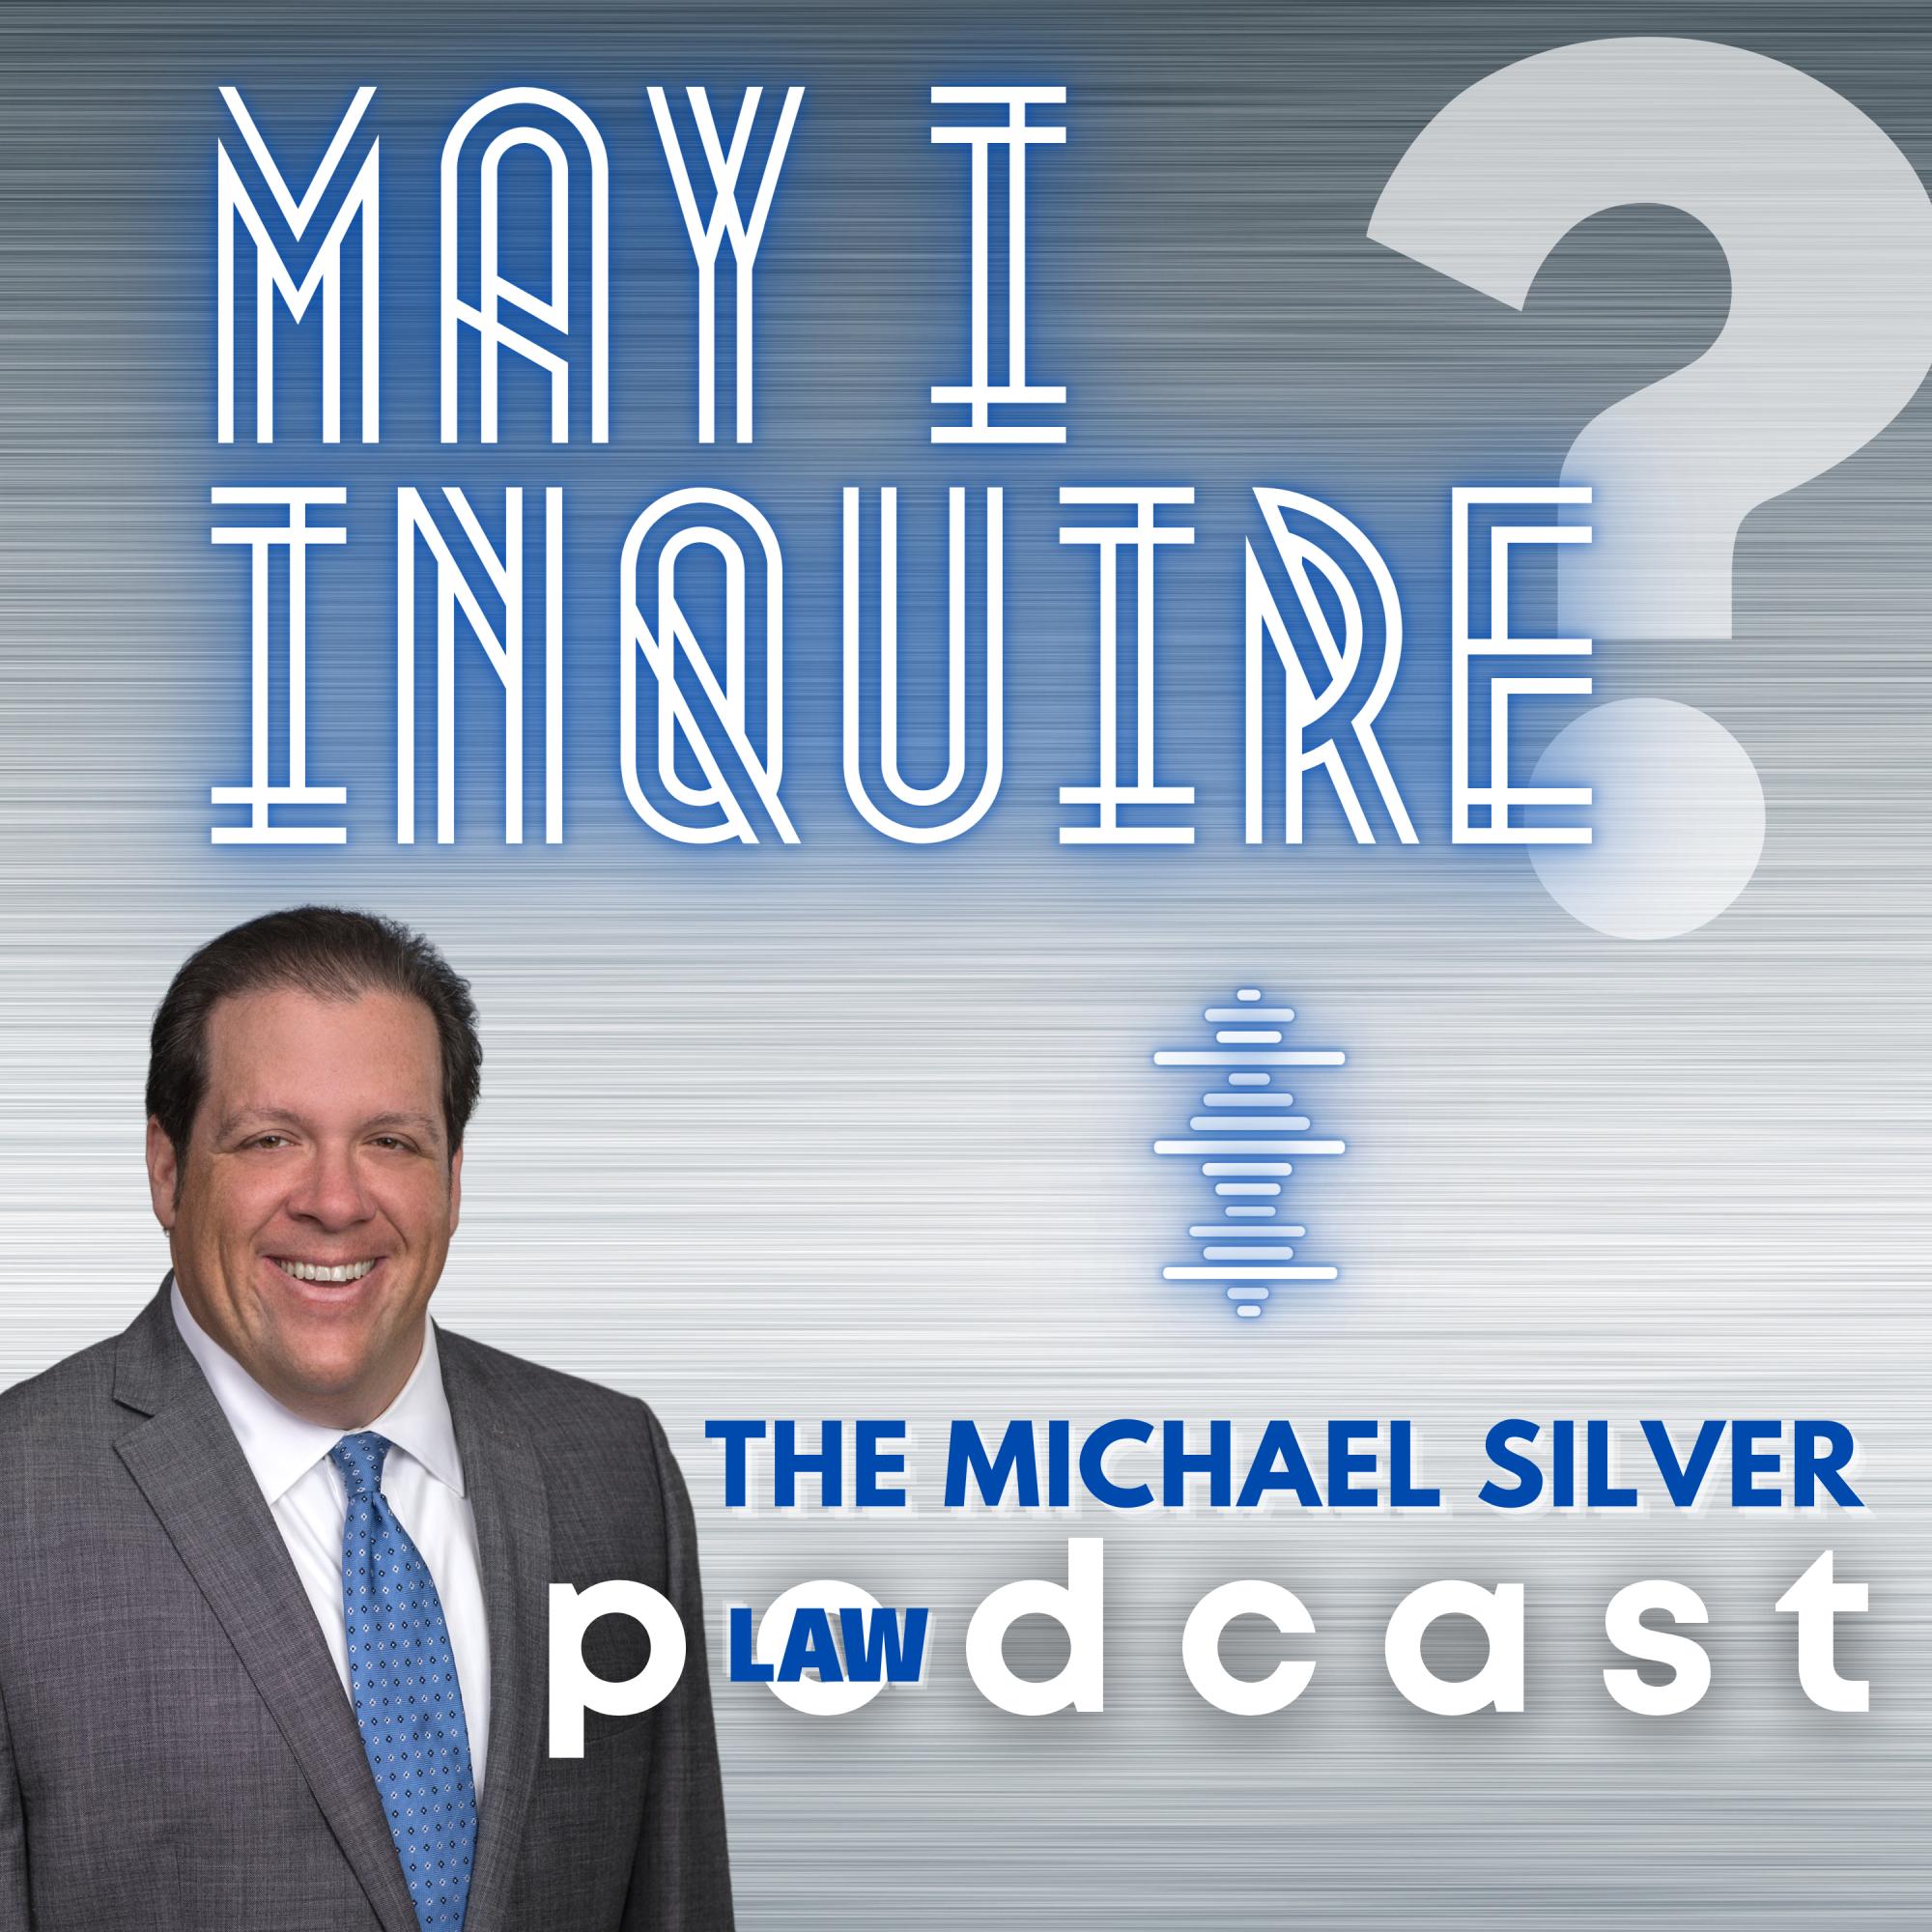 May I Inquire? The Michael Silver pLAWdcast